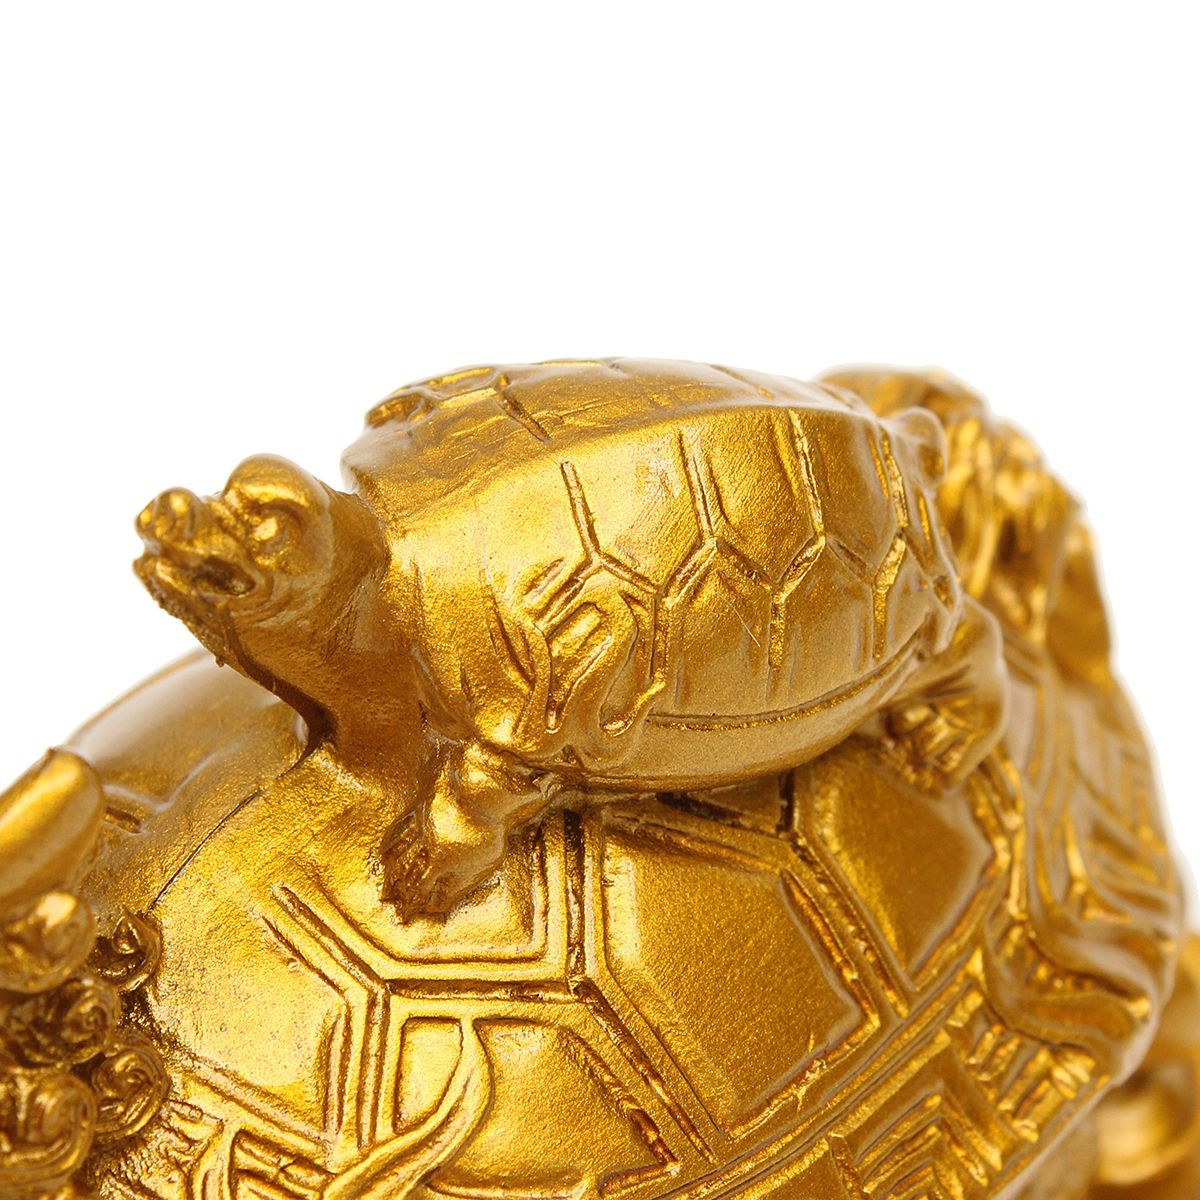 Resin-Statue-Decoration-Feng-Shui-Dragon-Turtle-Tortoise-Gold-Coin-Money-Wealth-Figurine-1224522